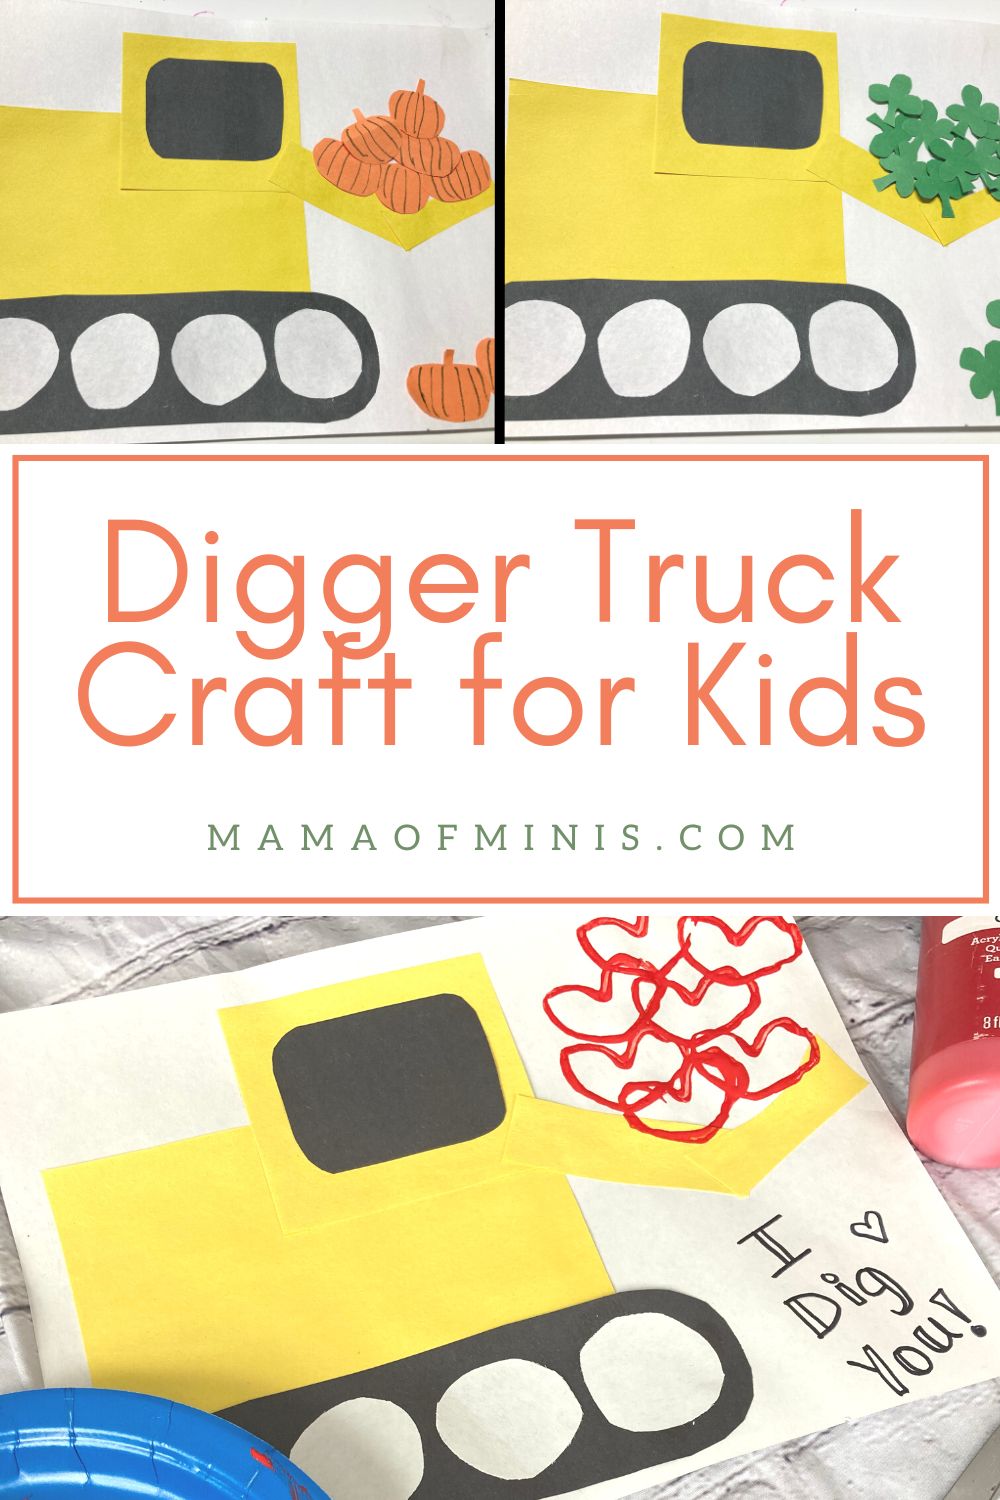 Digger Truck Craft for Kids